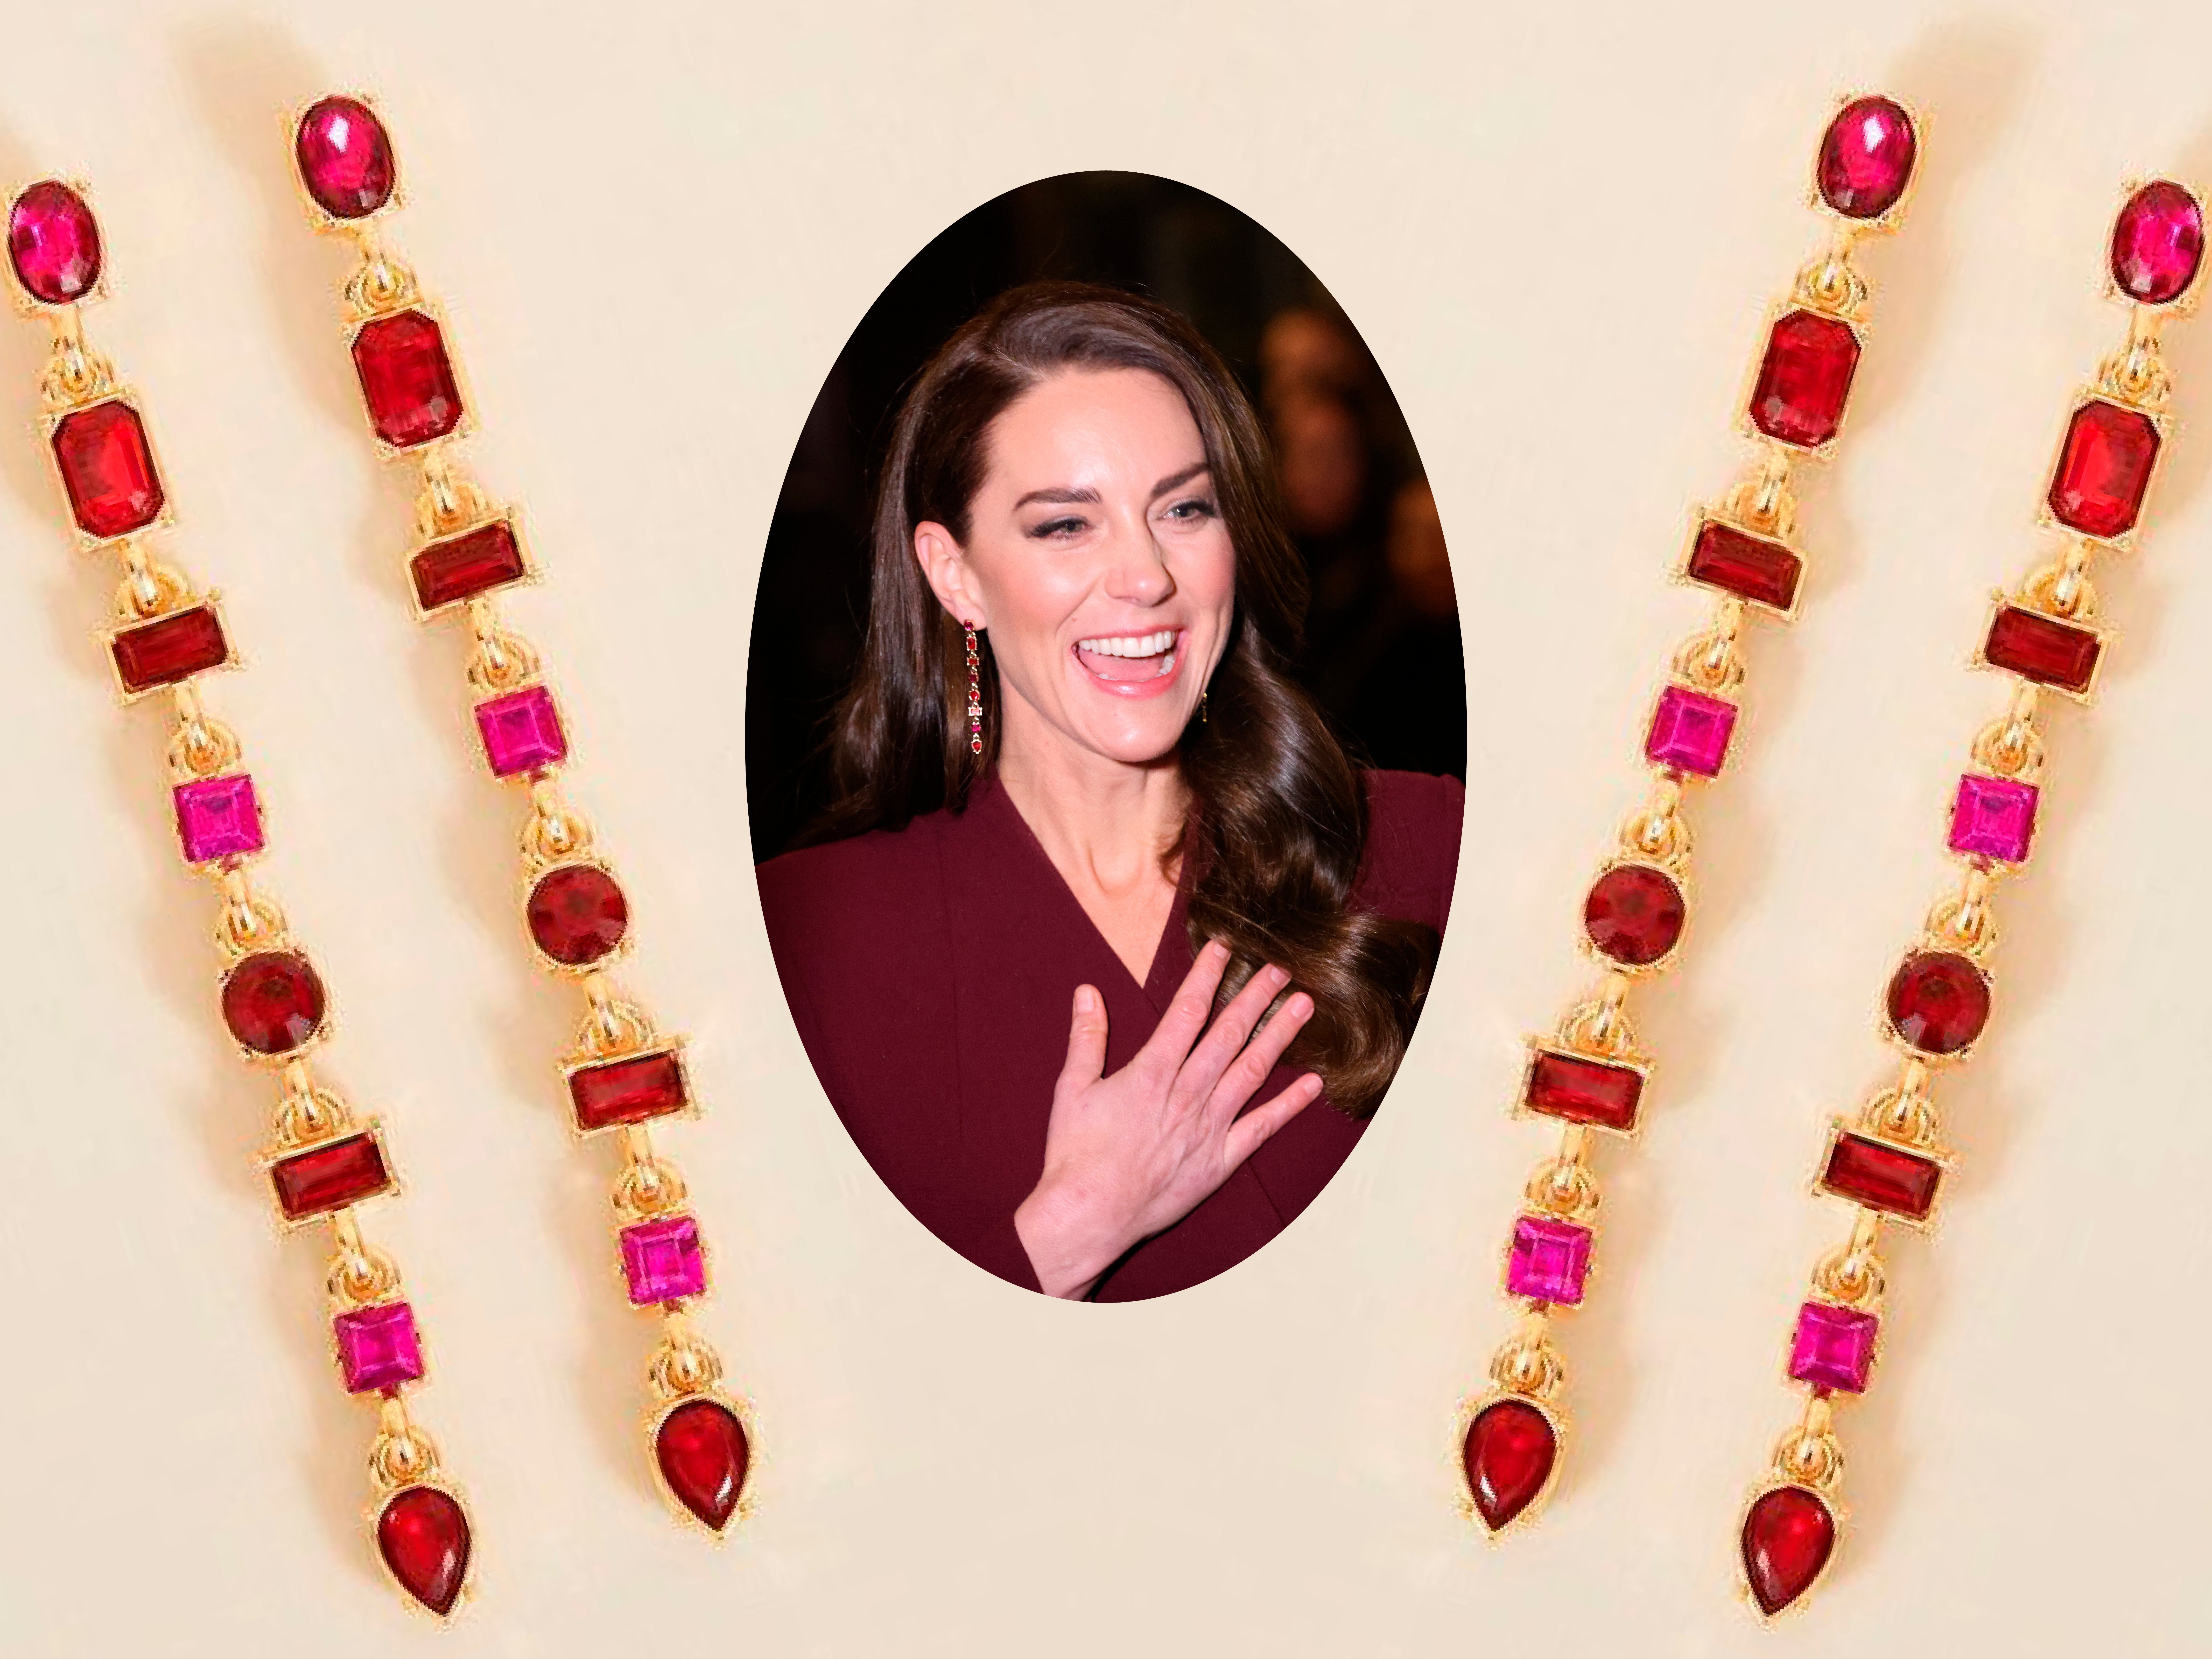 The earrings hail from one of Kate’s go-to high street jewellery brands